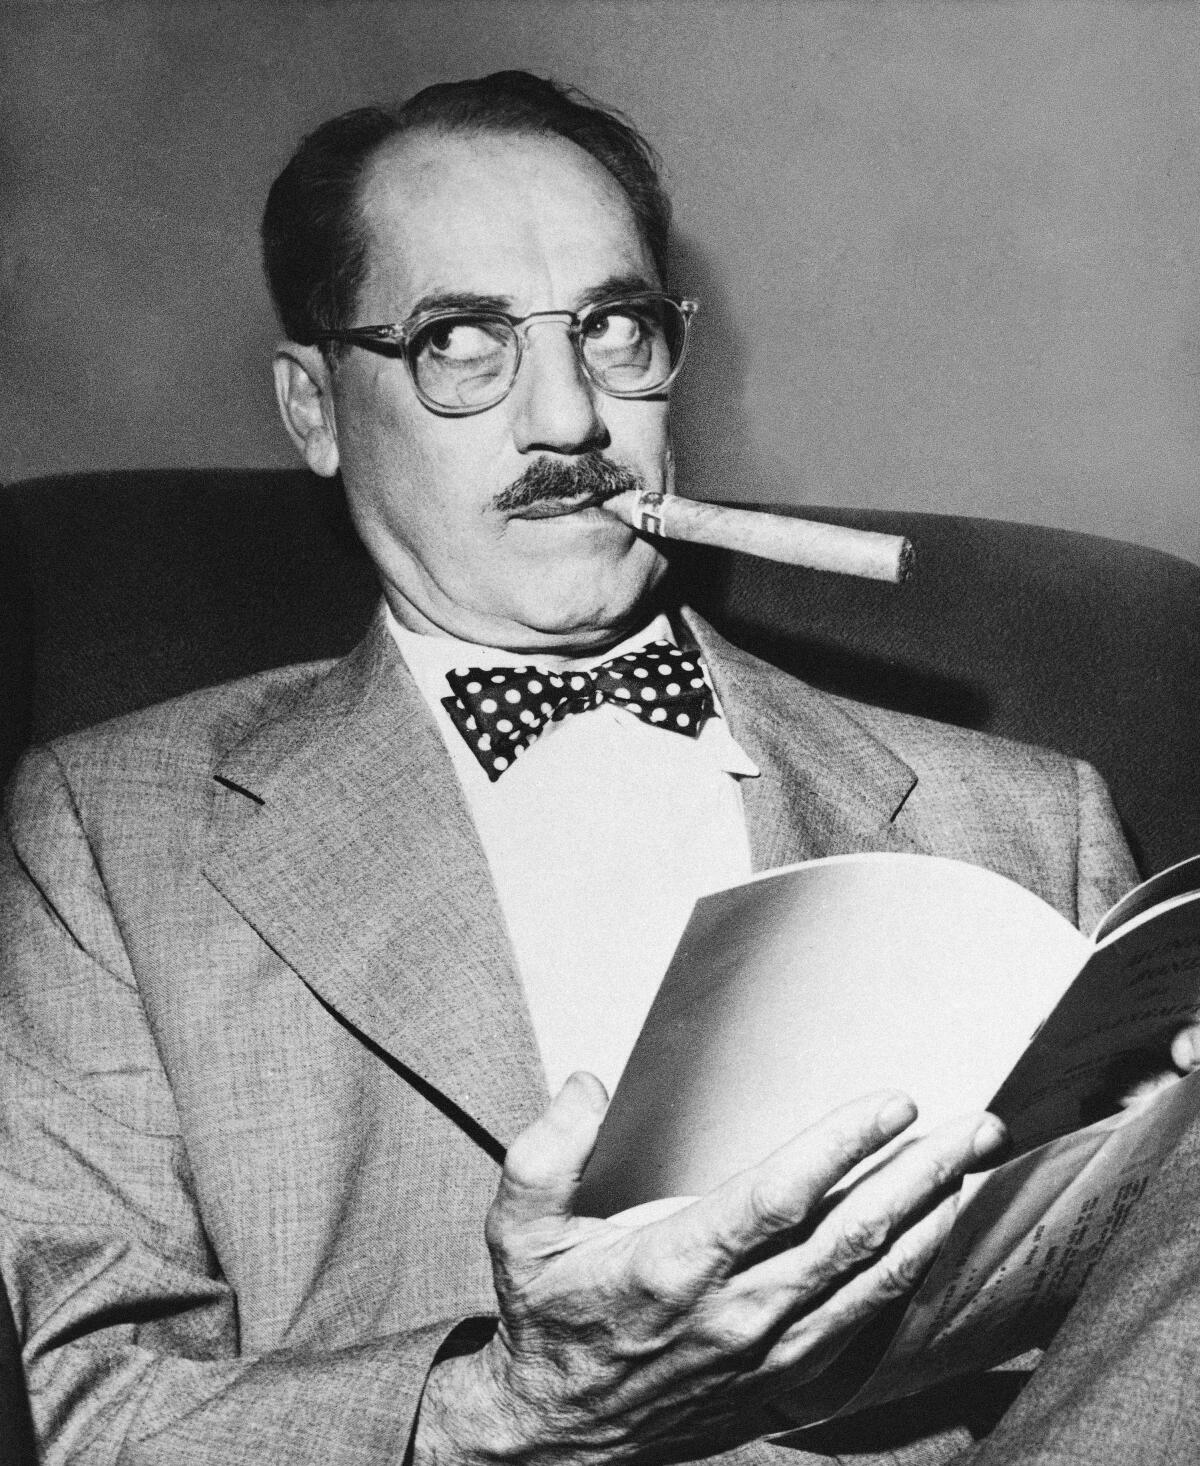 A man with a moustache, glasses and a cigar sits with a pamphlet in his hands and looks to the side.  